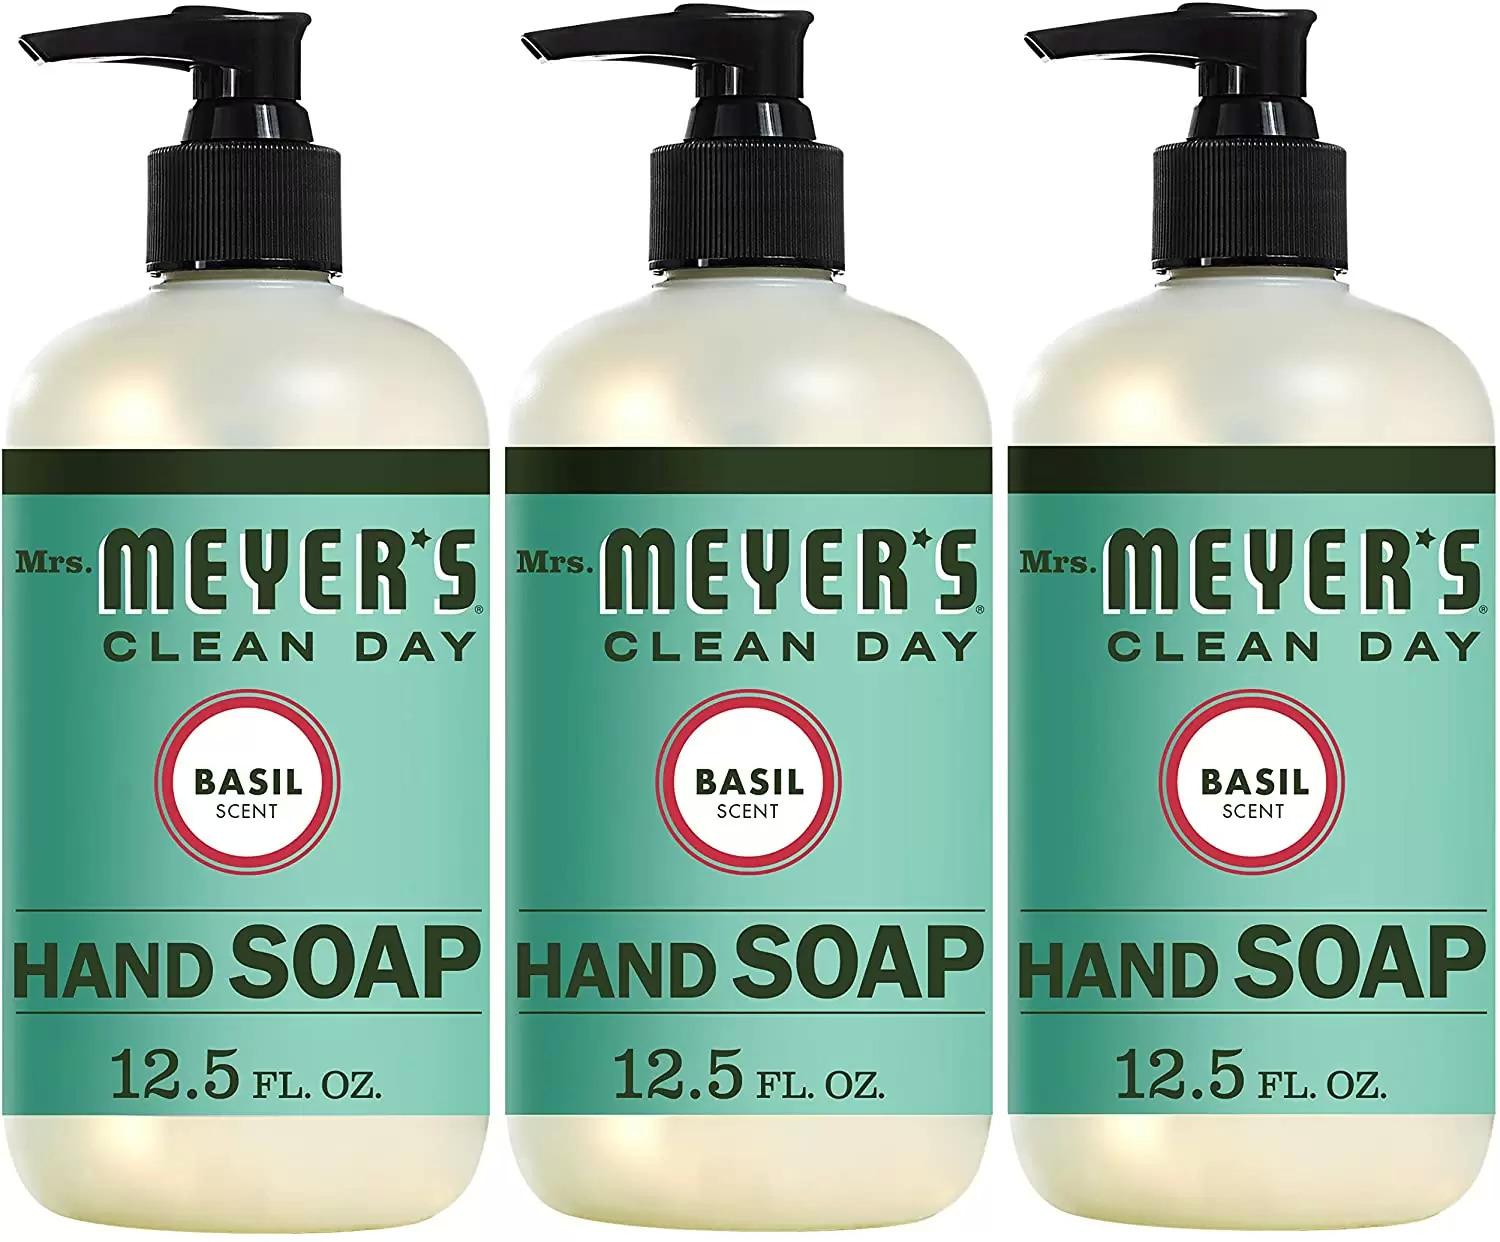 3 Mrs Meyers Clean Day Basil Liquid Hand Soap for $6.30 Shipped